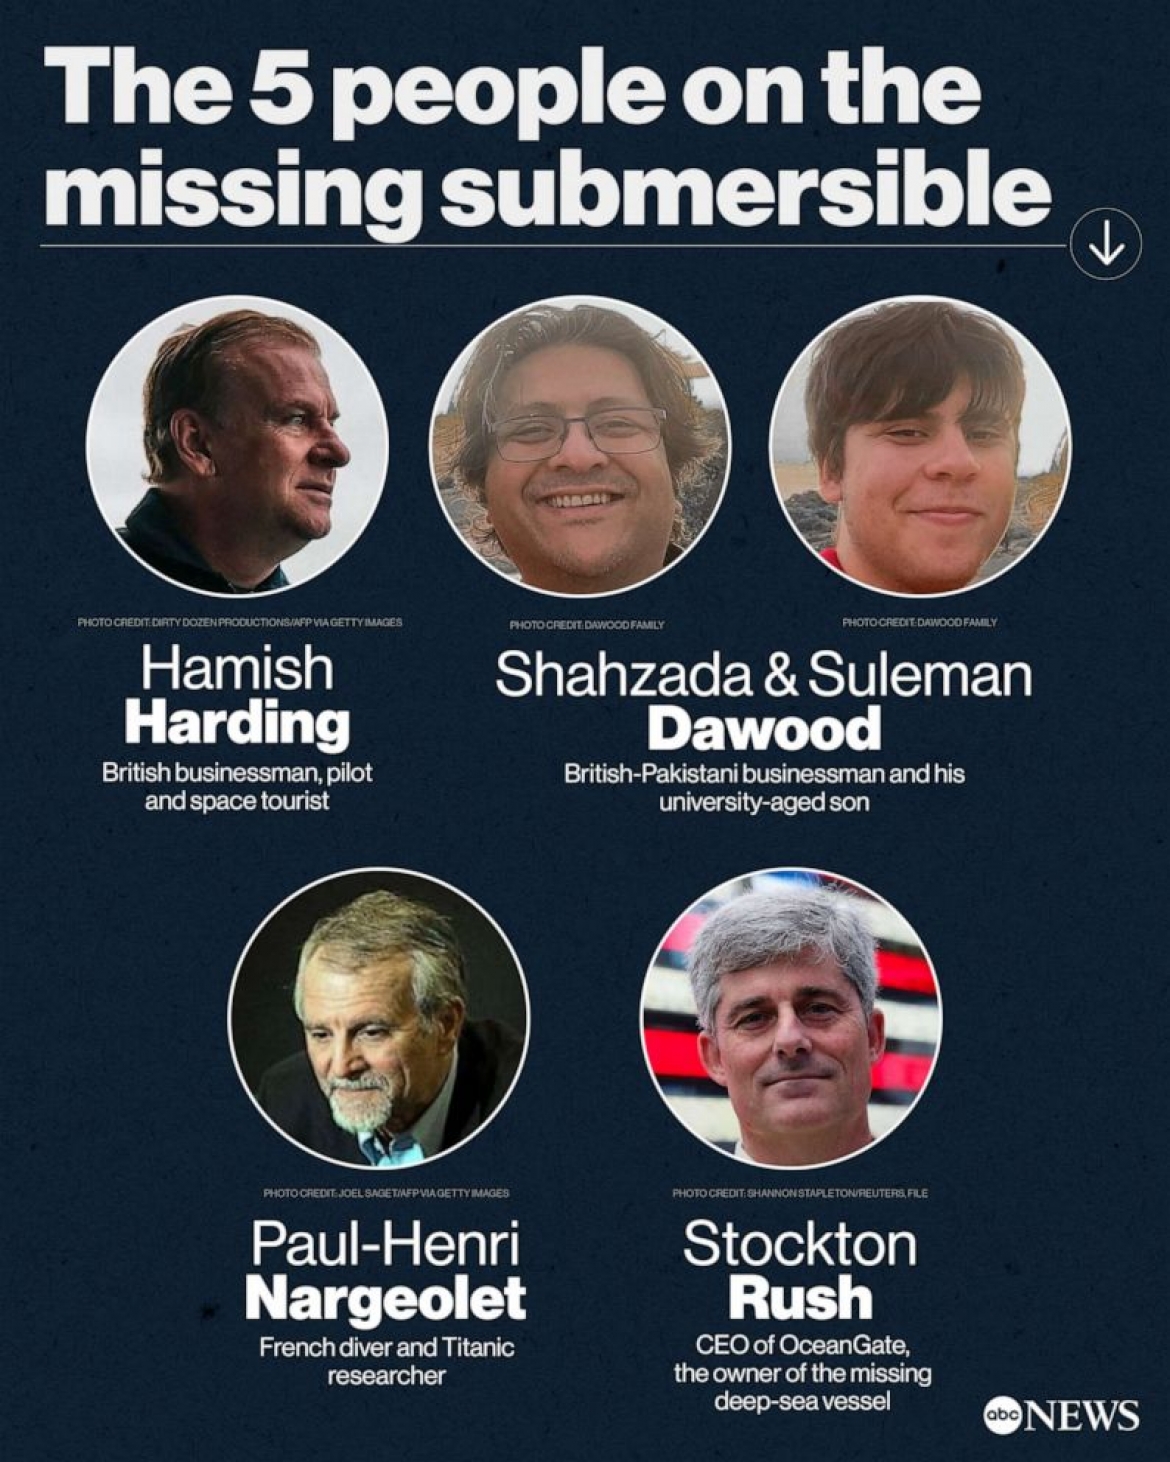 UPDATES ON THE SURVIVAL OF THE CREW MEMBERS ON THE MISSING SUBMARINE